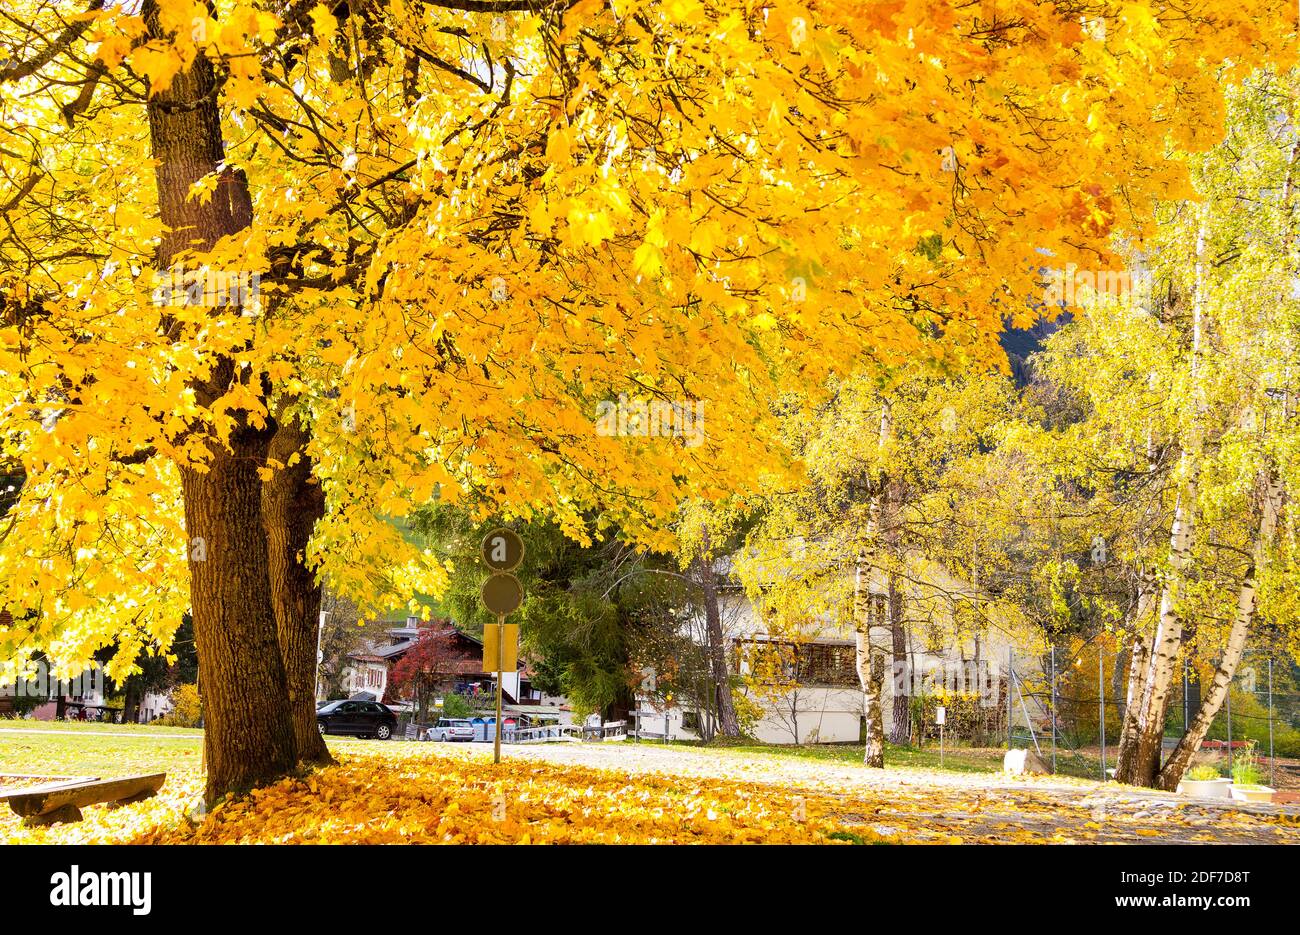 Big trees in autunm season with yellow leaves in the backlight on the roadside Stock Photo